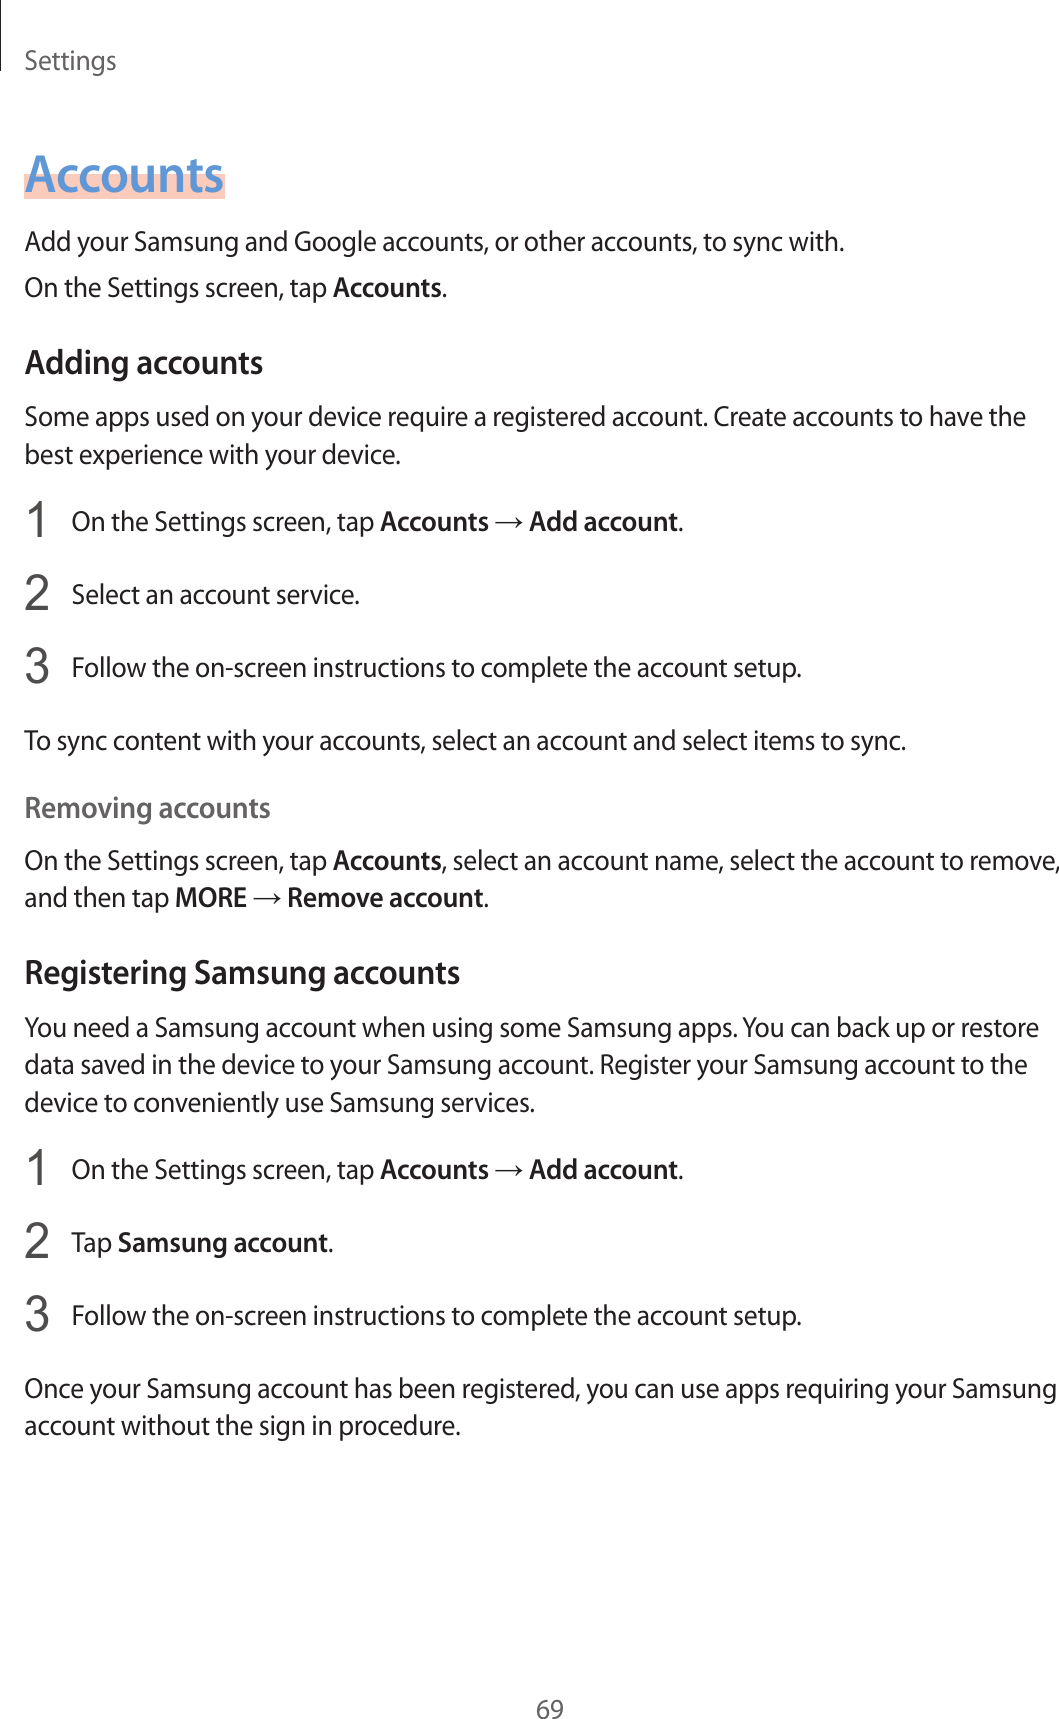 Settings69AccountsAdd y our Samsung and Google accoun ts , or other acc ounts, to sync with.On the Settings screen, tap Accounts.Adding ac c oun tsSome apps used on your device r equir e a r egist er ed ac coun t. Cr ea te ac coun ts to ha v e the best experience with your devic e .1  On the Settings screen, tap Accounts → Add ac c ount.2  Select an accoun t service.3  Follow the on-screen instructions to complete the ac coun t setup.To sync conten t with y our acc ounts , select an accoun t and select items to sync .Removing acc oun tsOn the Settings screen, tap Accounts, select an account name, select the accoun t to r emo v e , and then tap MORE → Remov e acc oun t.Registering Samsung acc ountsYou need a Samsung account when using some Samsung apps. You can back up or restore data sav ed in the devic e to y our Samsung acc ount . Regist er y our Samsung accoun t to the device to c on v eniently use Samsung services.1  On the Settings screen, tap Accounts → Add ac c ount.2  Tap Samsung account.3  Follow the on-screen instructions to complete the ac coun t setup.Once your Samsung ac coun t has been r egist er ed , y ou can use apps r equiring your Samsung account without the sig n in pr oc edur e .